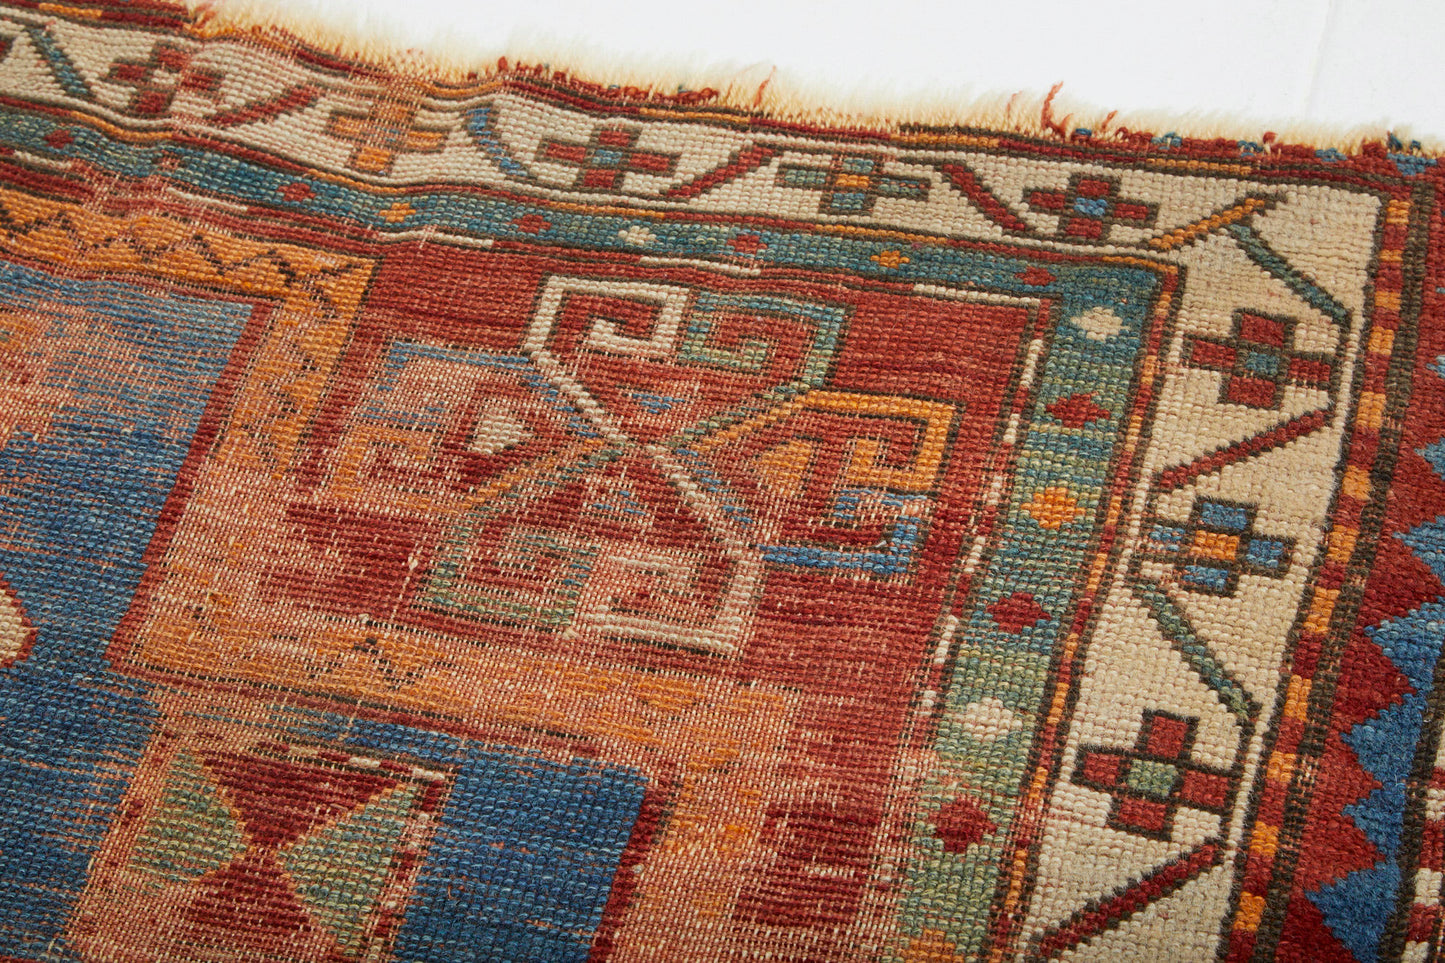 Detail of corner border of antique Kazak Persian Rug with red, tan, blue and cream colors - Available from King Kennedy Rugs Los Angeles